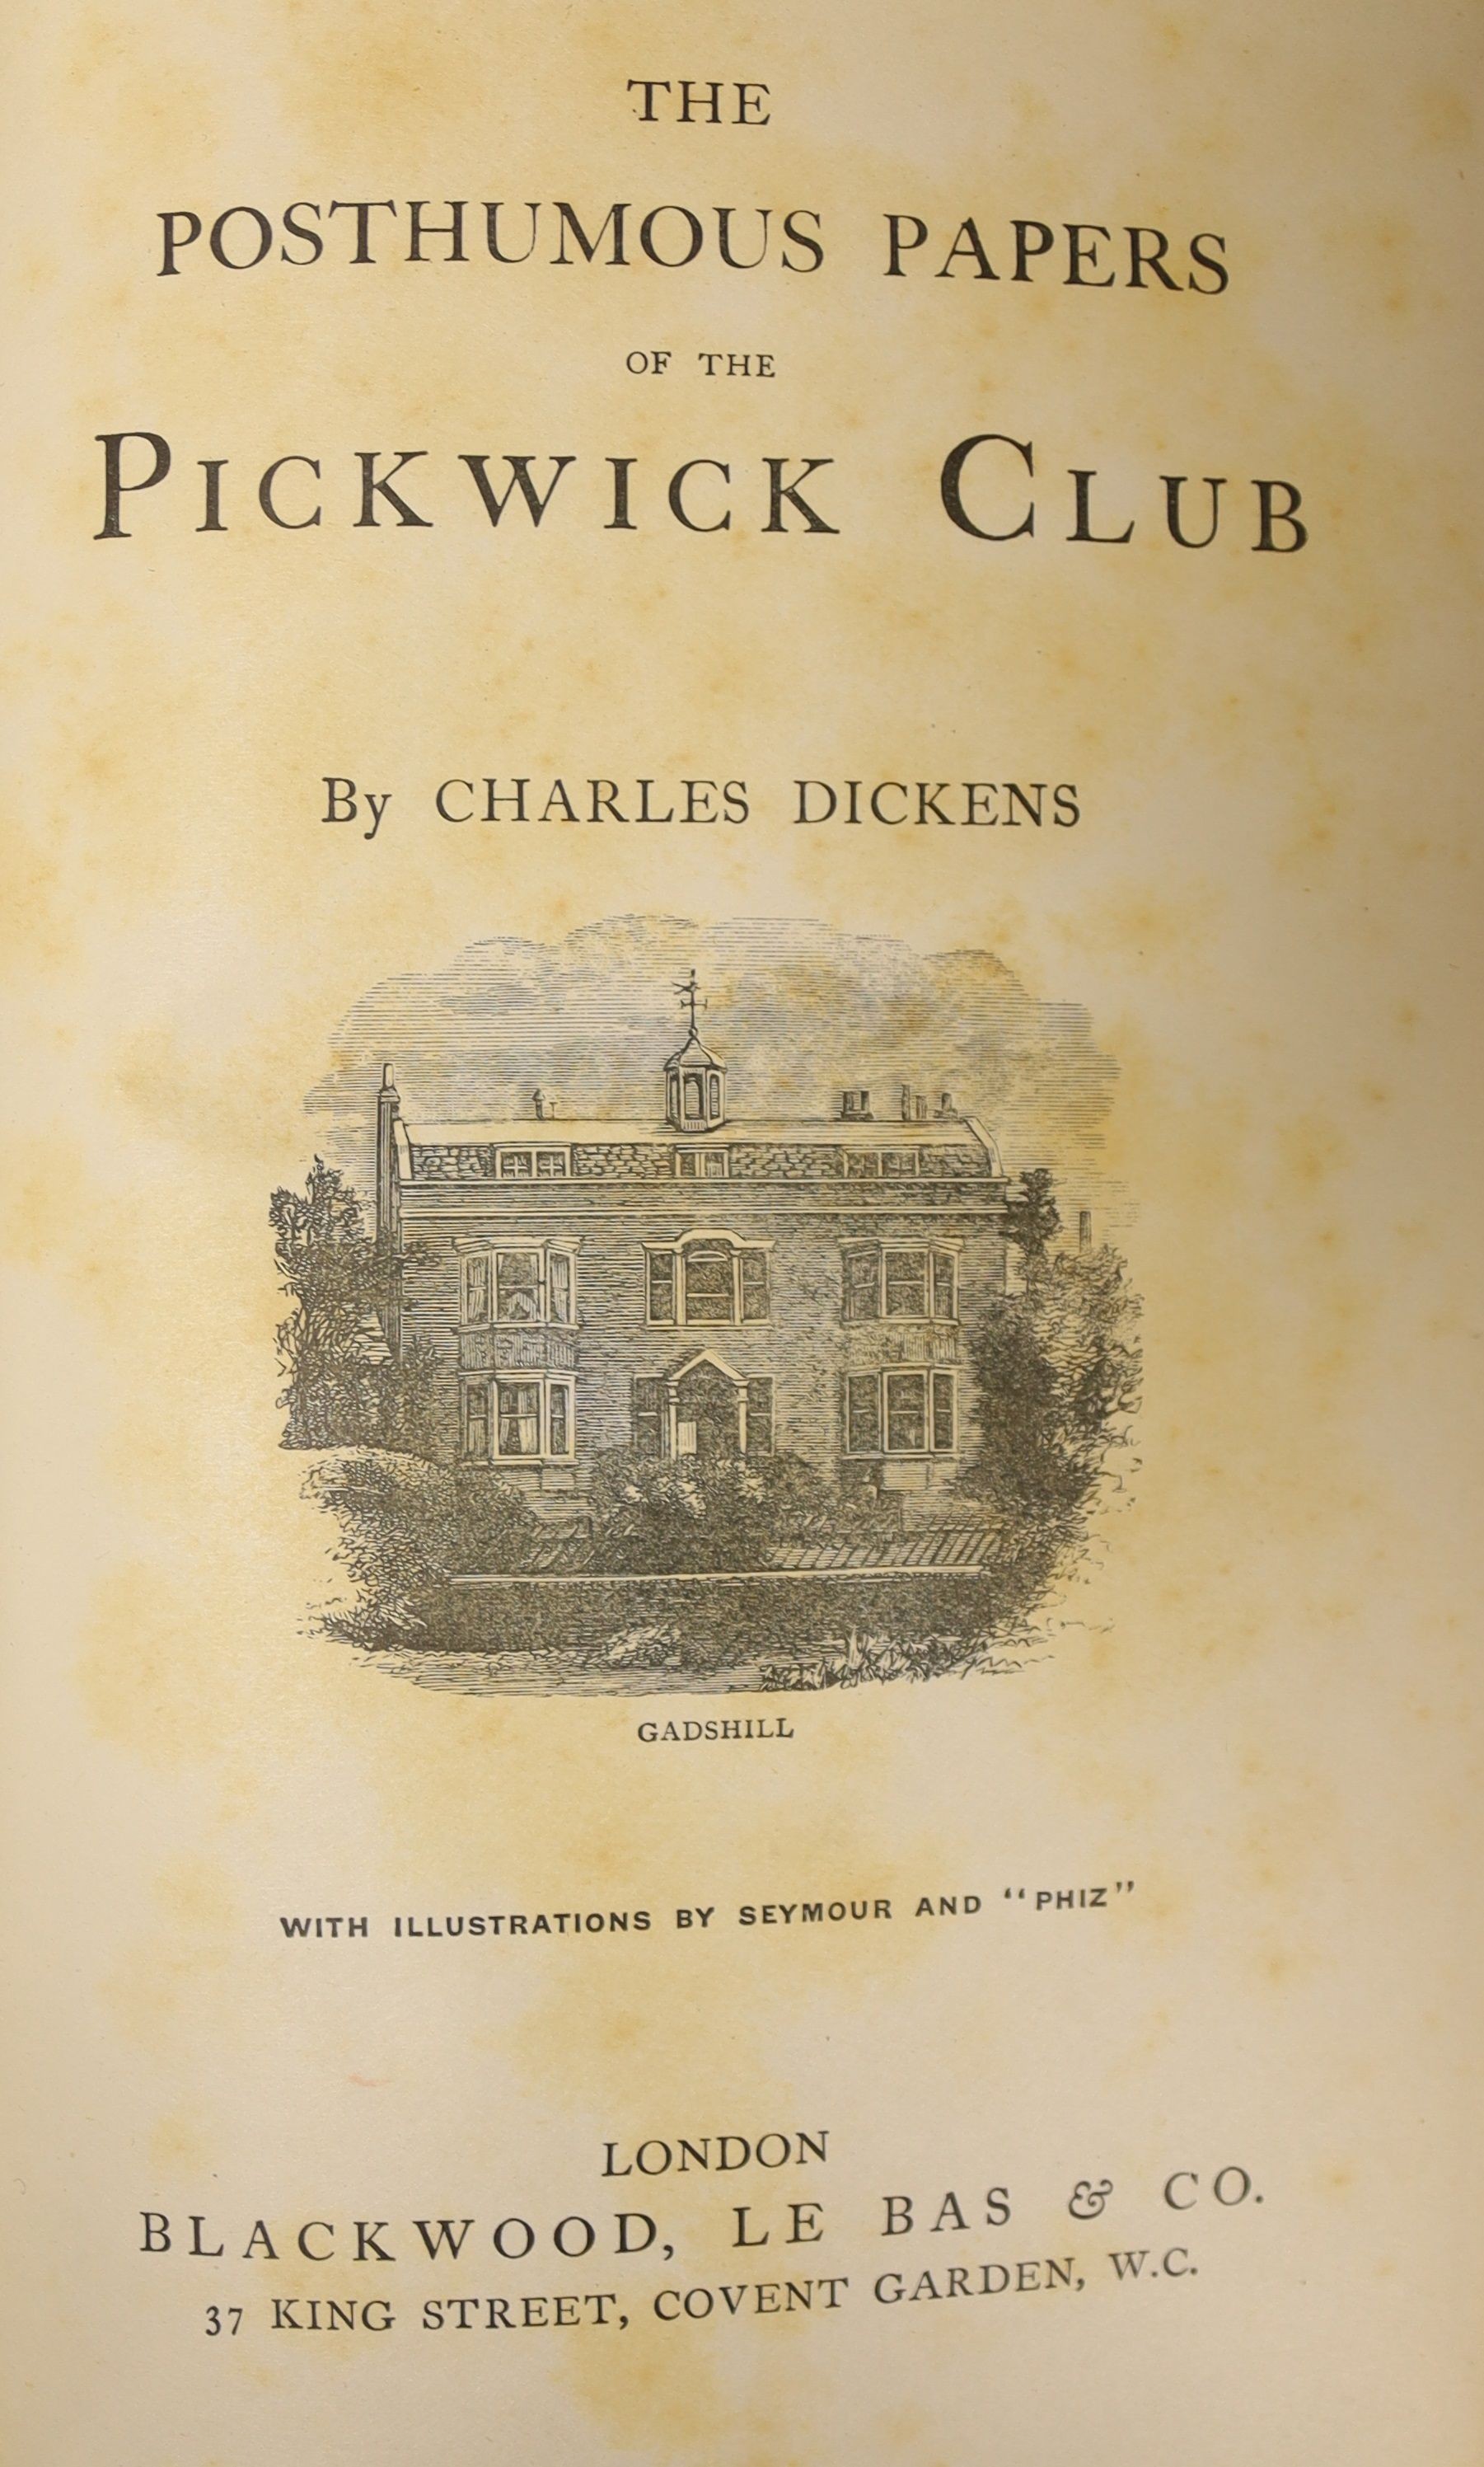 Dickens, Charles - The Works, 12 vols, blue cloth gilt, illustrations by ‘’Phiz’’, Seymour, and others, Blackwood, Le Bas & Co., [c.1900]; Hueffer, Ford, Maddox - The Cinque Ports, illustrated by William Hyde, qto, cloth